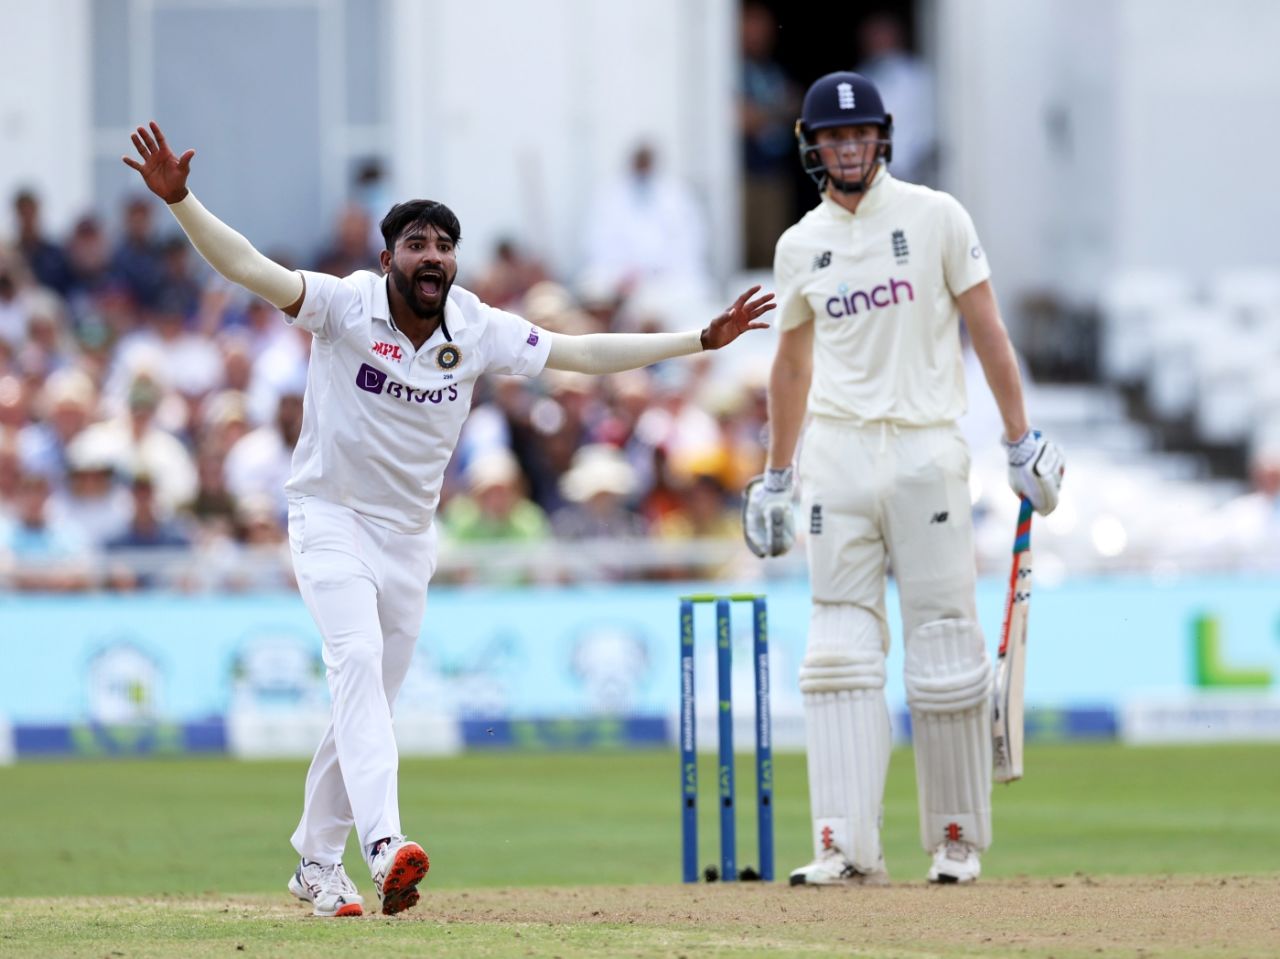 Mohammed Siraj appeals for a caught behind against Zak Crawley - which was given on review, England vs India, 1st Test, Nottingham, 1st day, August 4, 2021